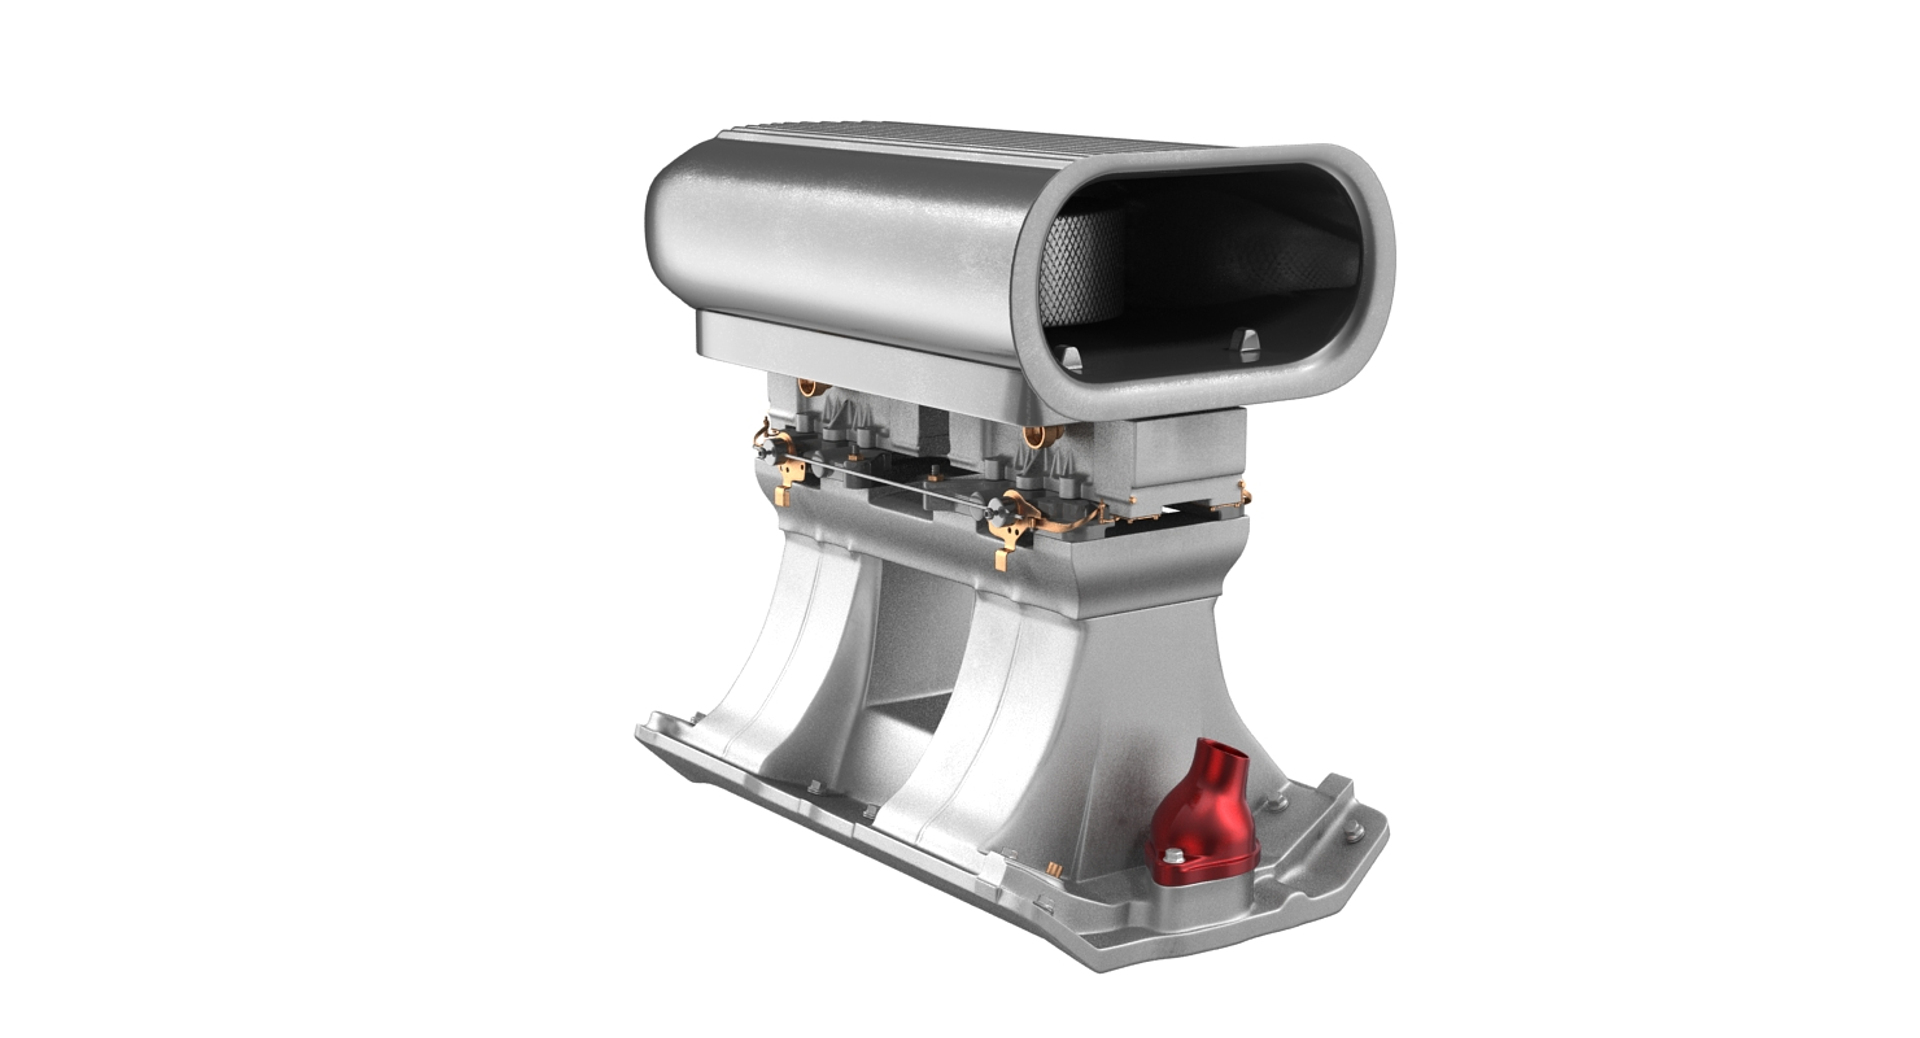 Red Engine With Supercharger Front View 3d Render On White